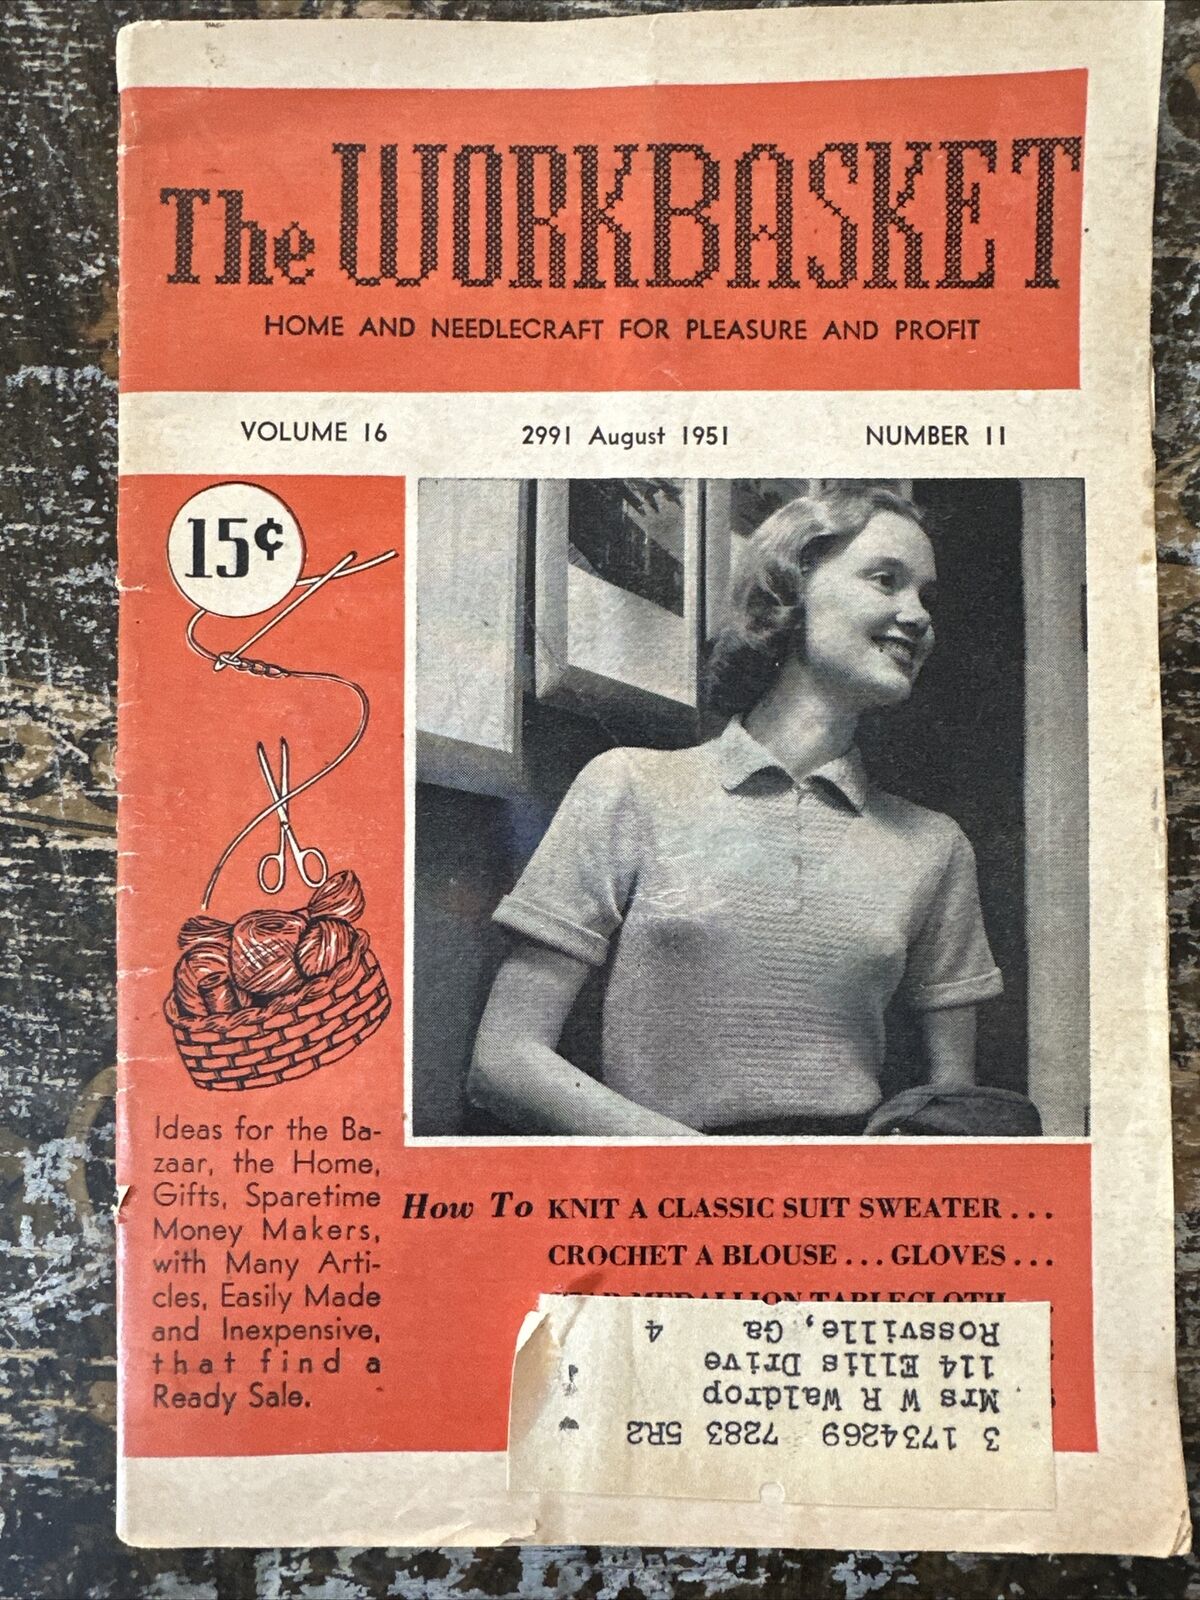 The Workbasket Home And Needlecraft For Pleasure and Profit 1951 Vintage